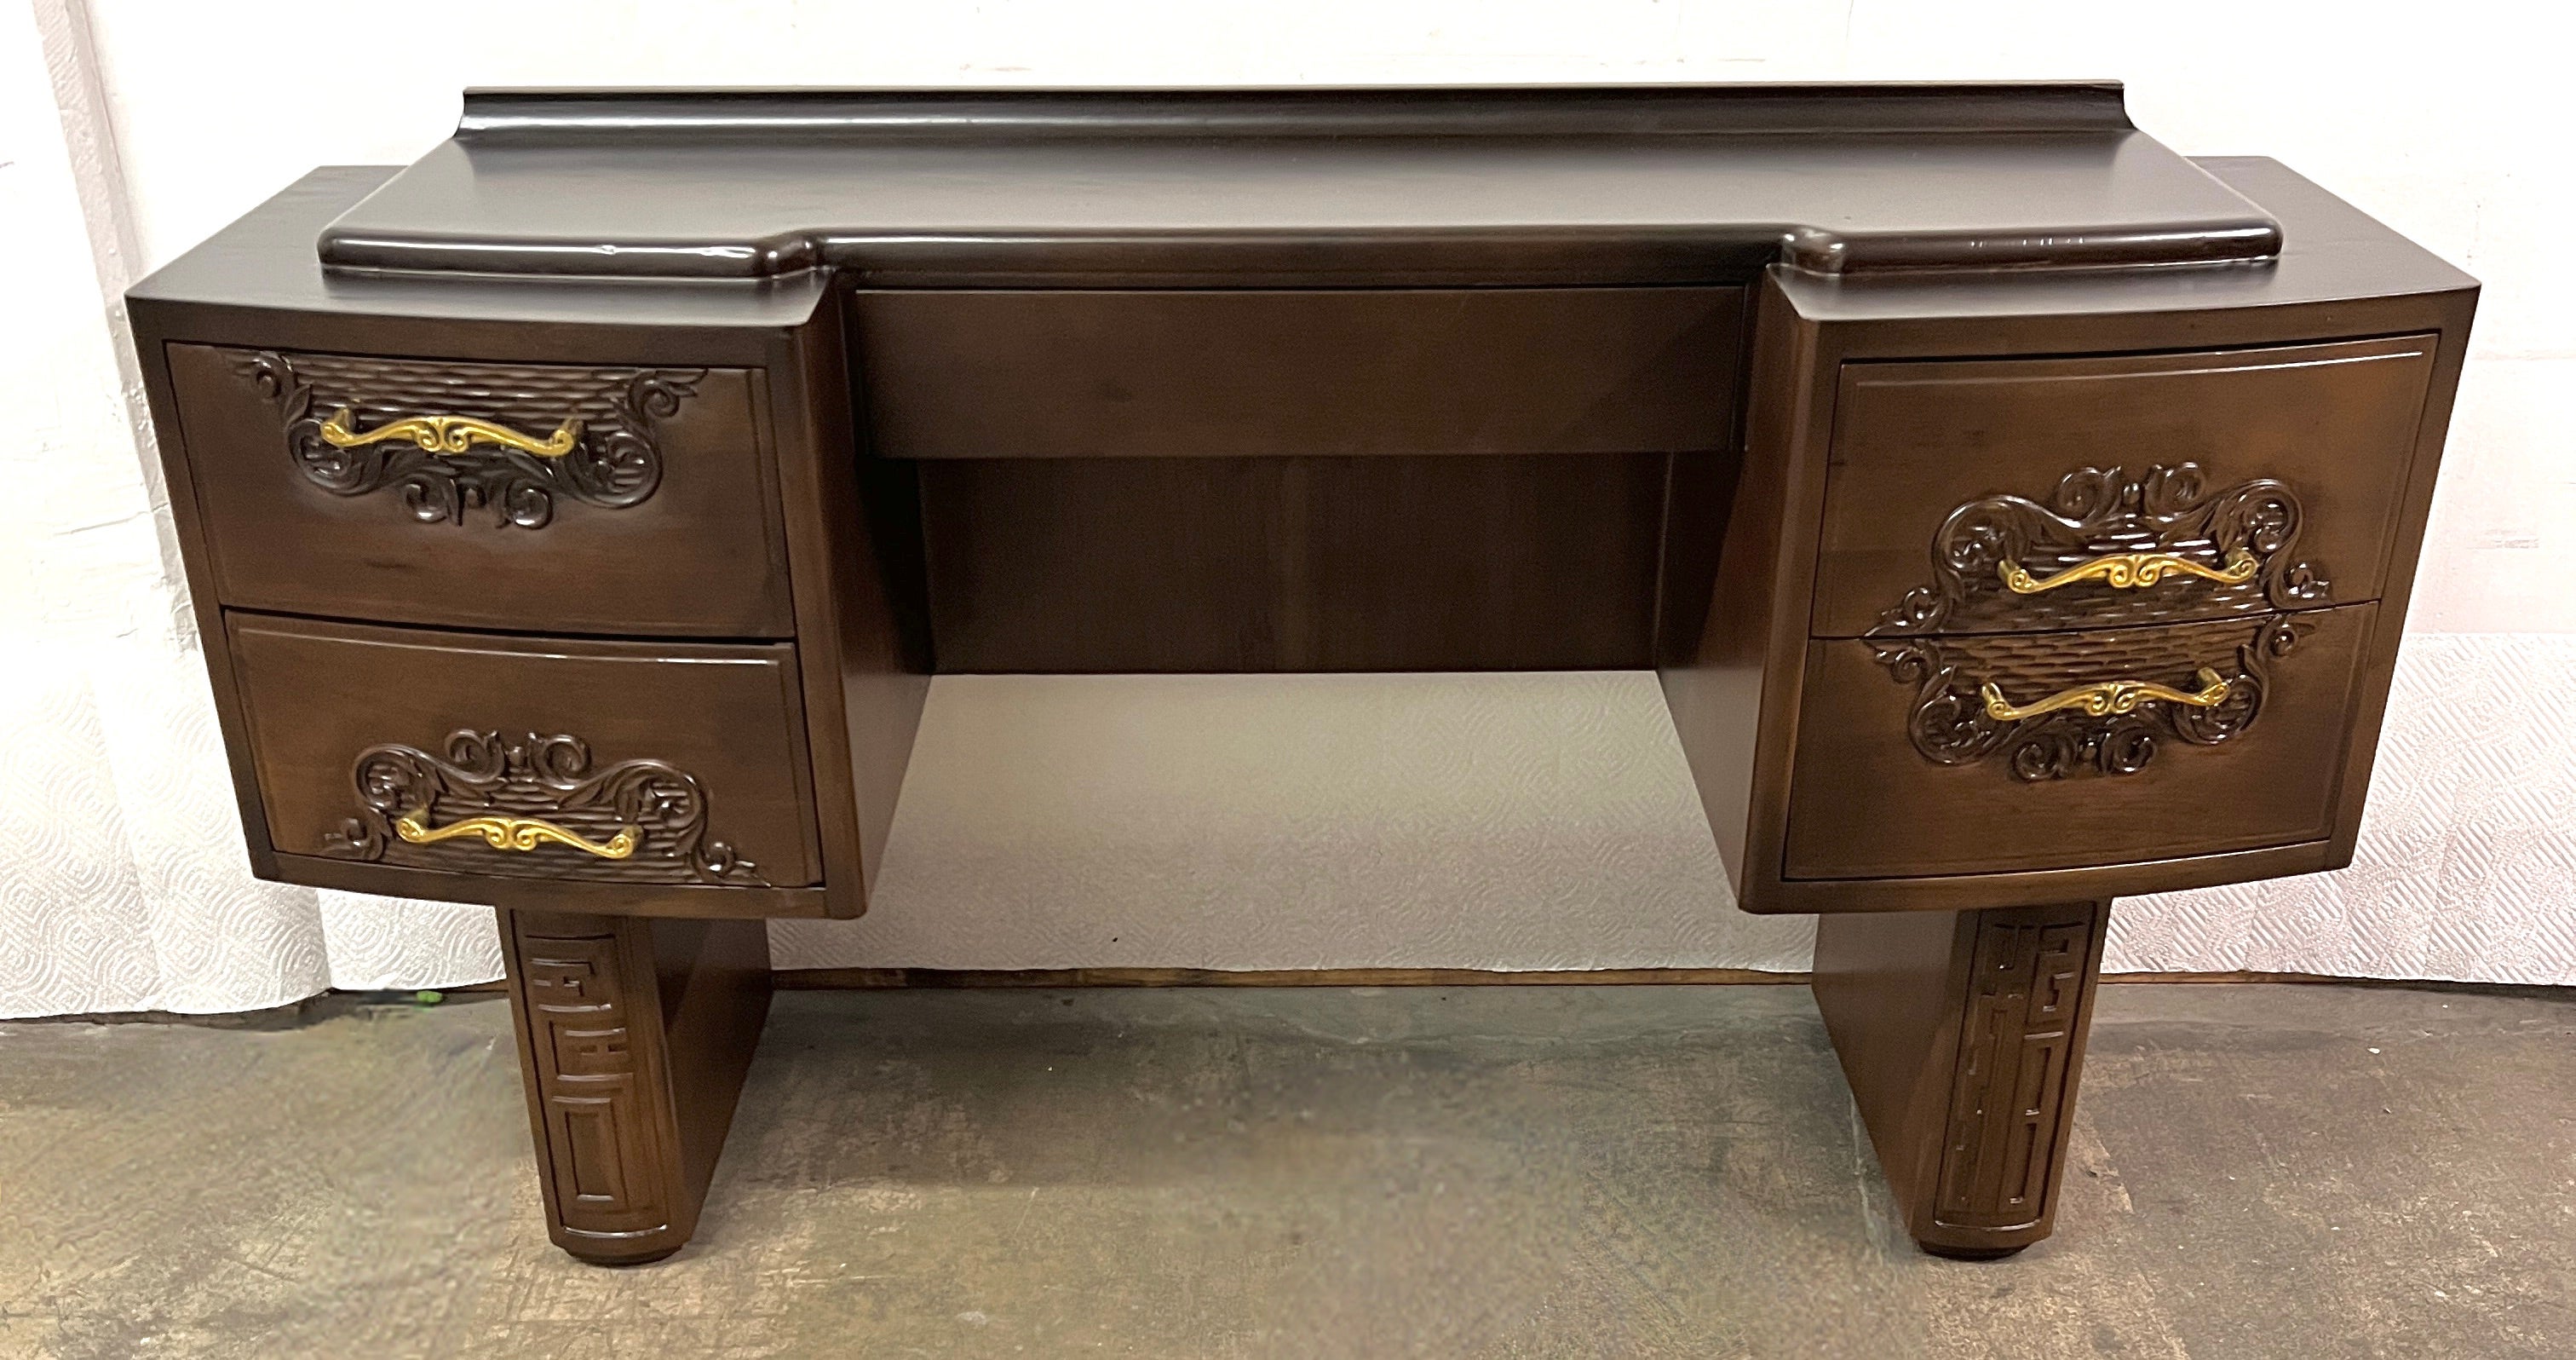 Walnut 5 Drawer French Vanity in the Style of Charles Dudouyt.  

A compliment to many spaces, the dressing room, bedroom, guest room and, in some spaces, could work as an entry or hallway table

This stunning vanity features hand carved drawers, in